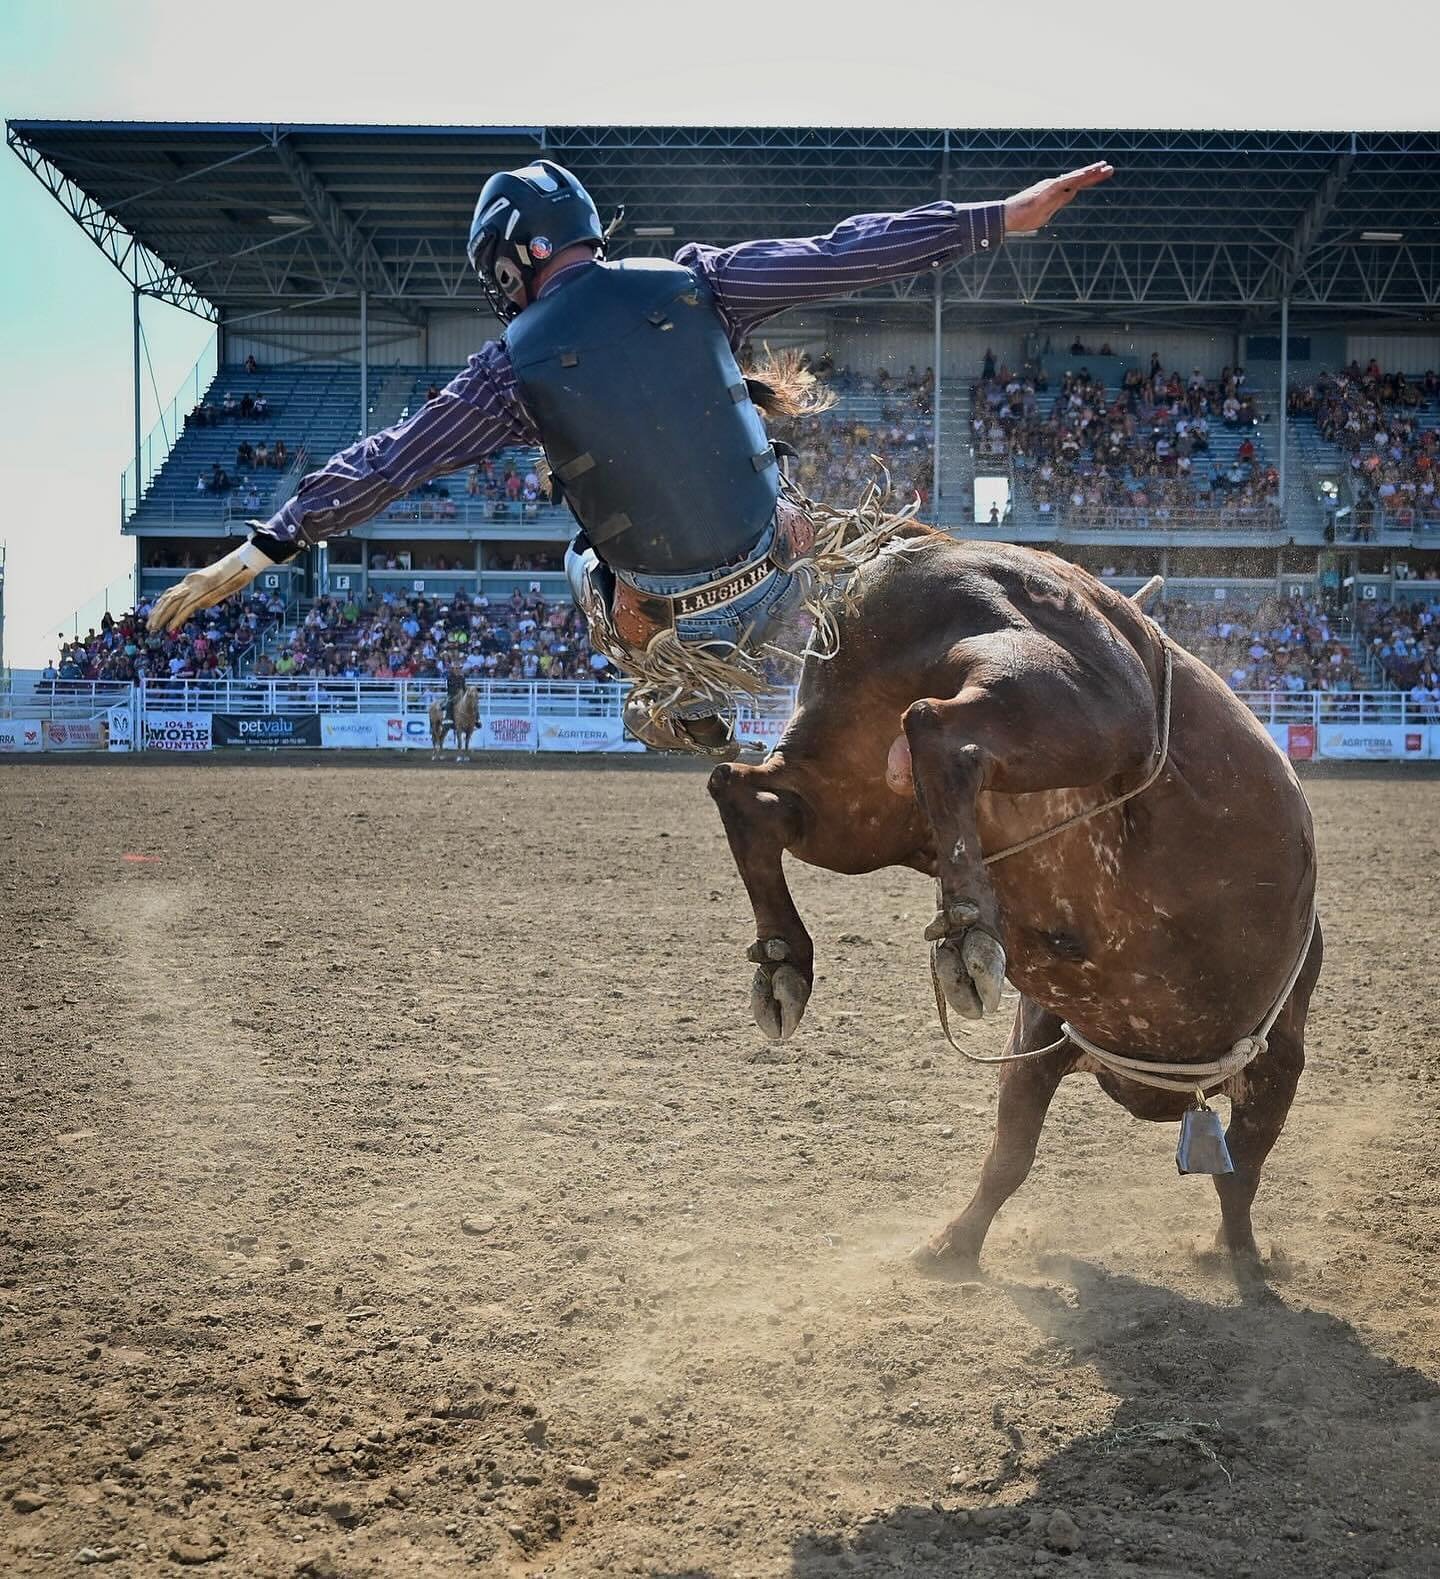 Hang on, Stampede tickets are still available 😉

Head to strathmorestampede.com or click the link in our bio to get yours before they are gone!

📸: @thomasevalentine